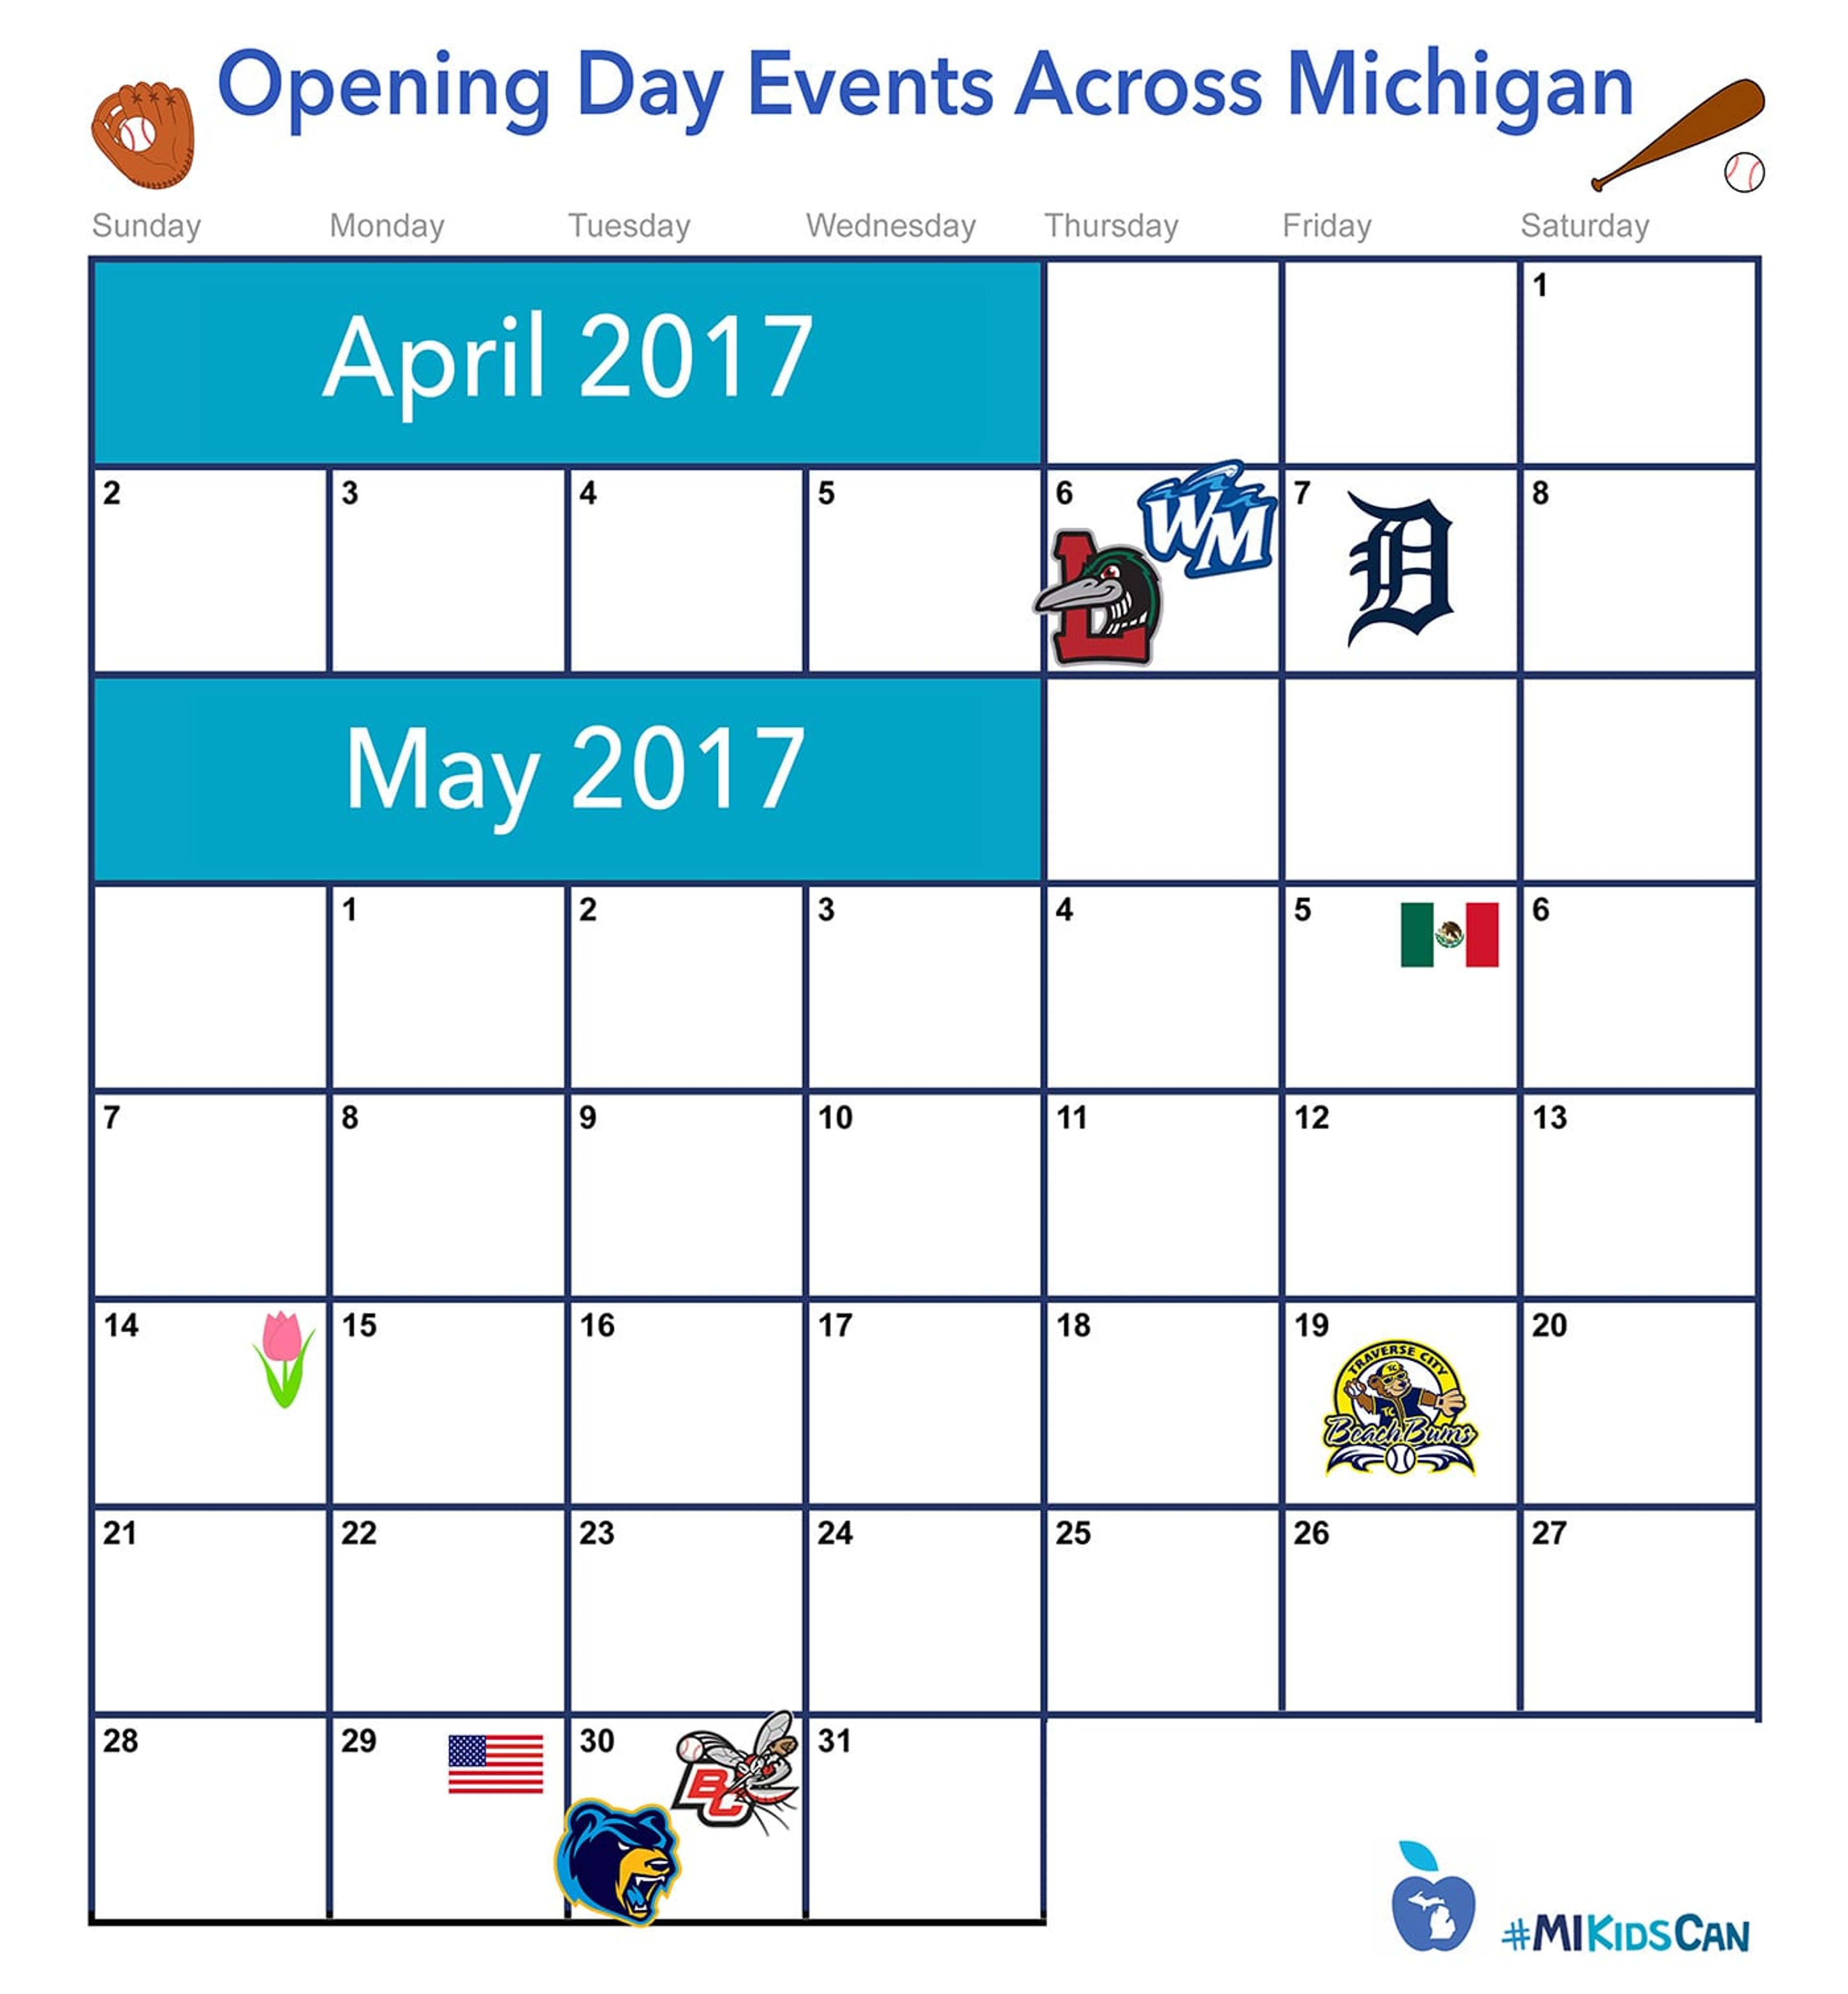 Opening Day Events across Michigan